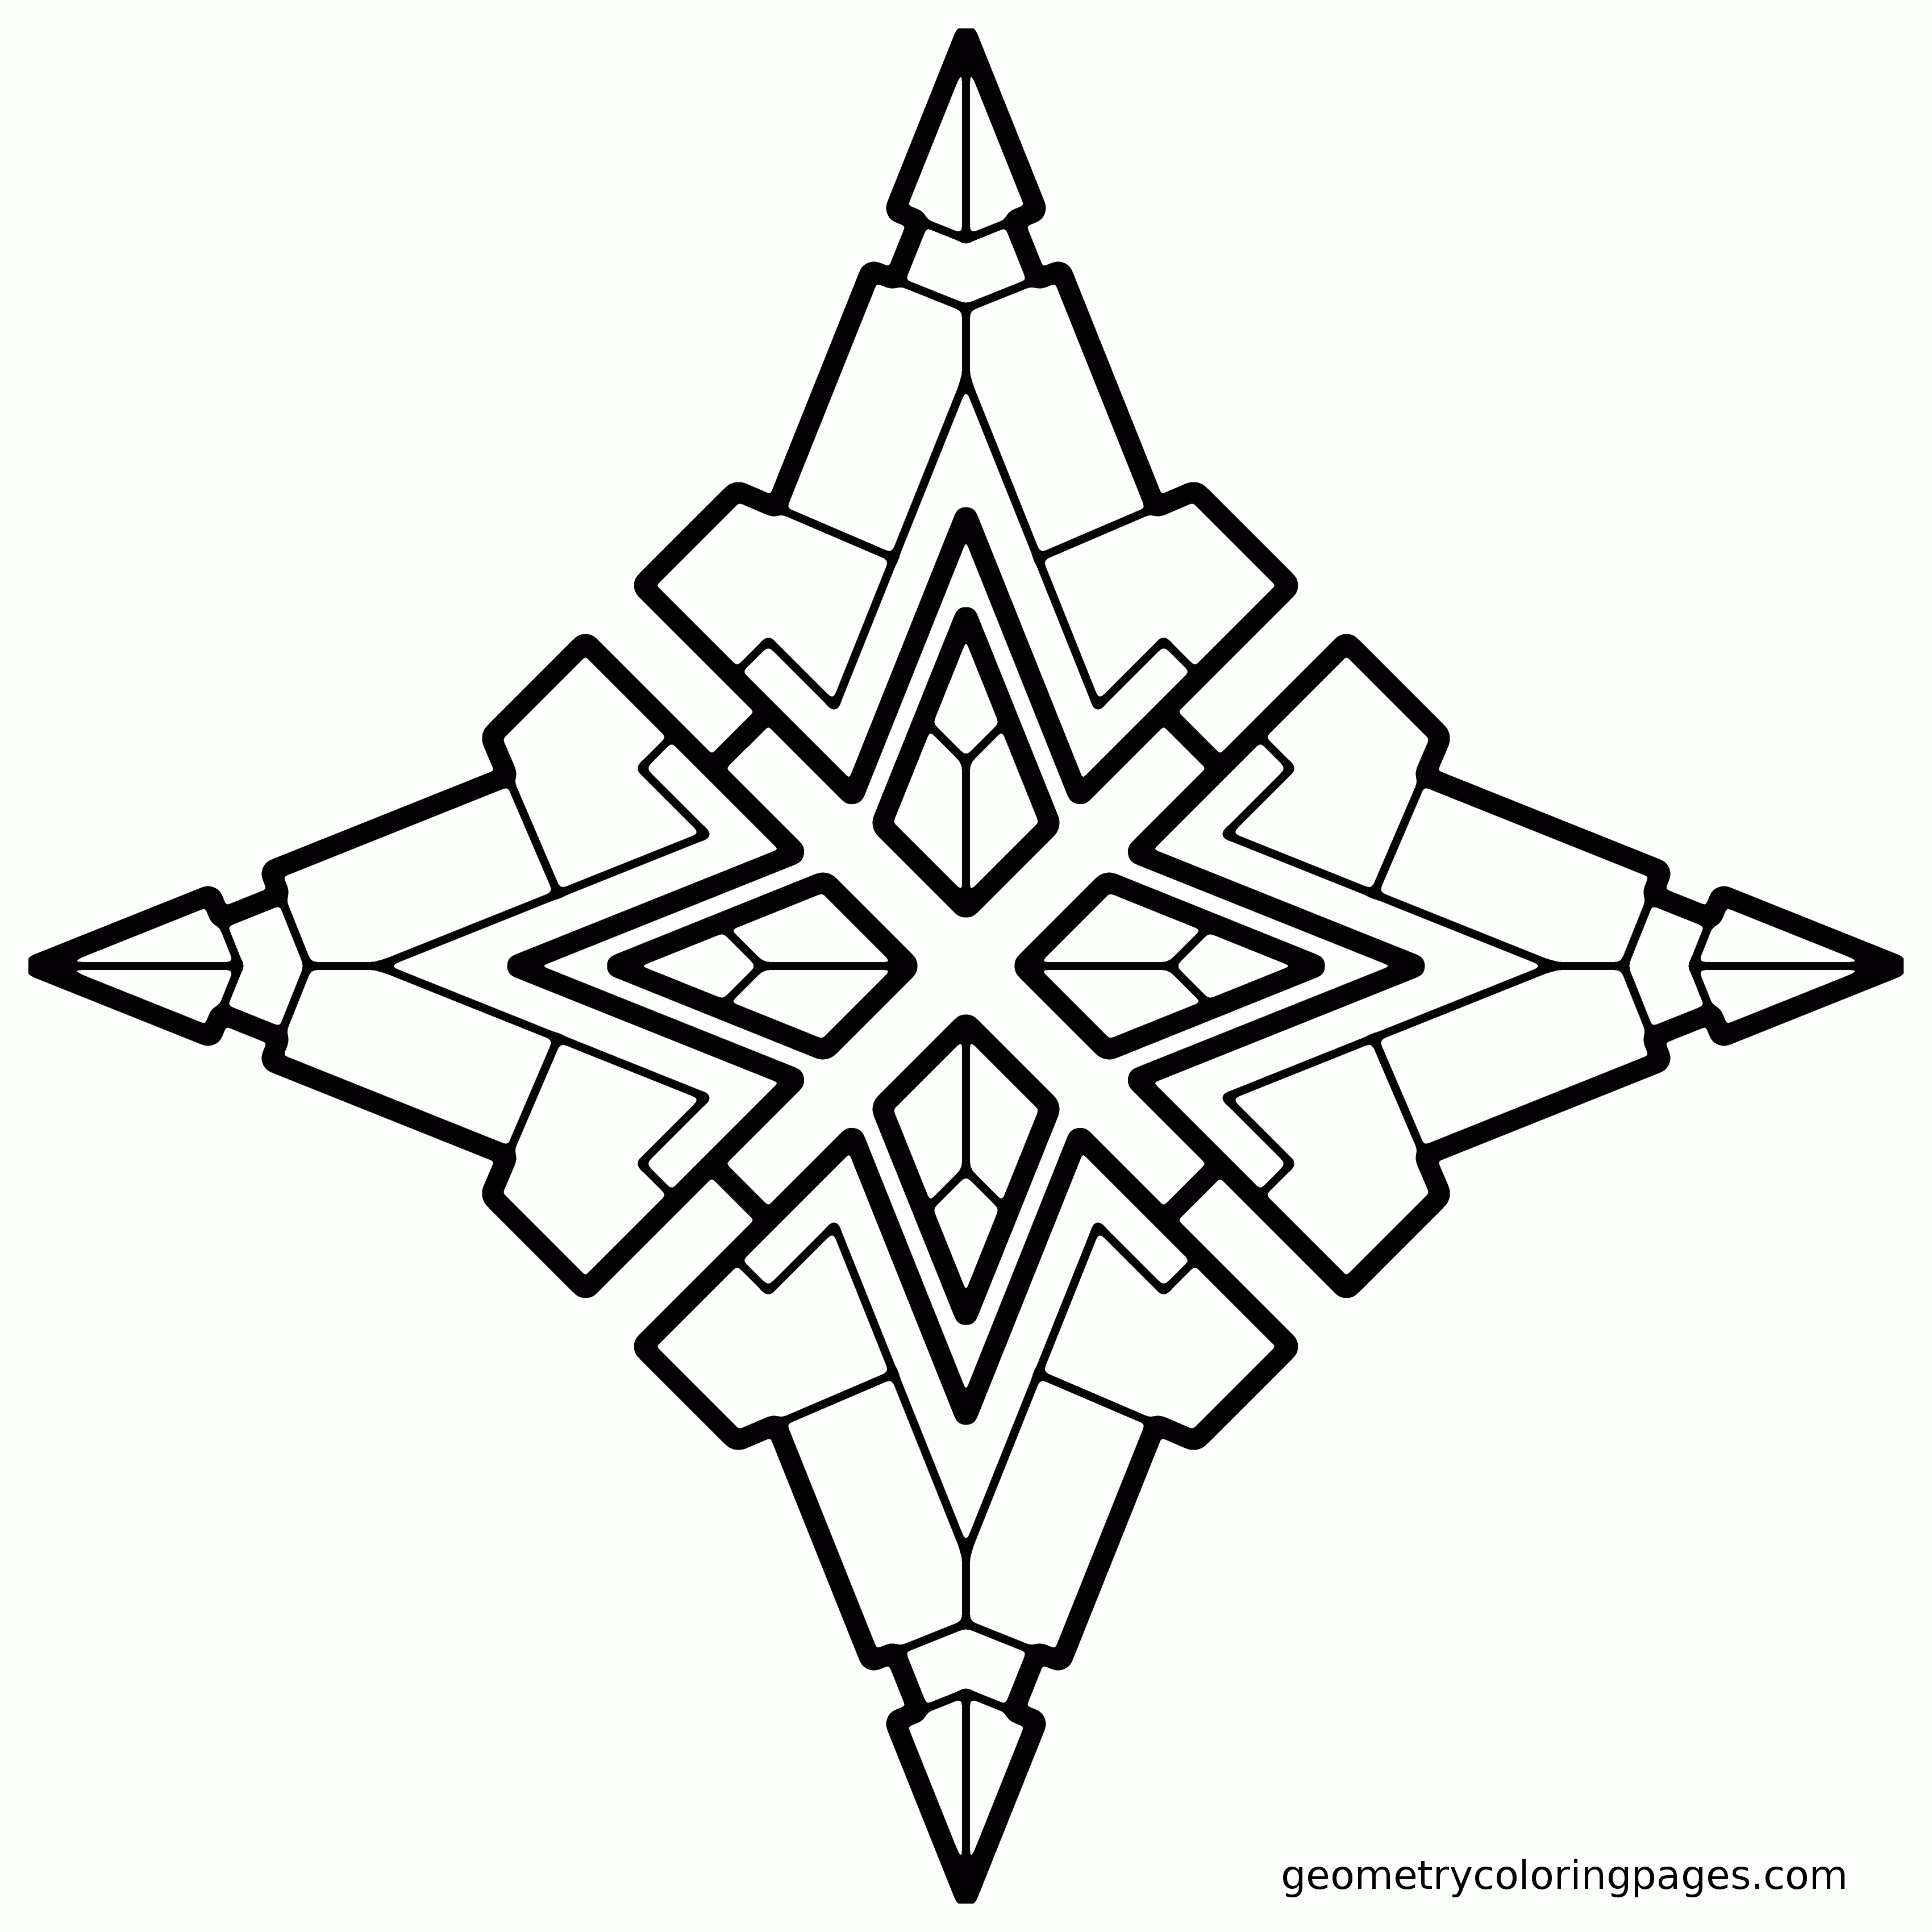 Coloring Pages Geometric Art - Coloring Style Pages